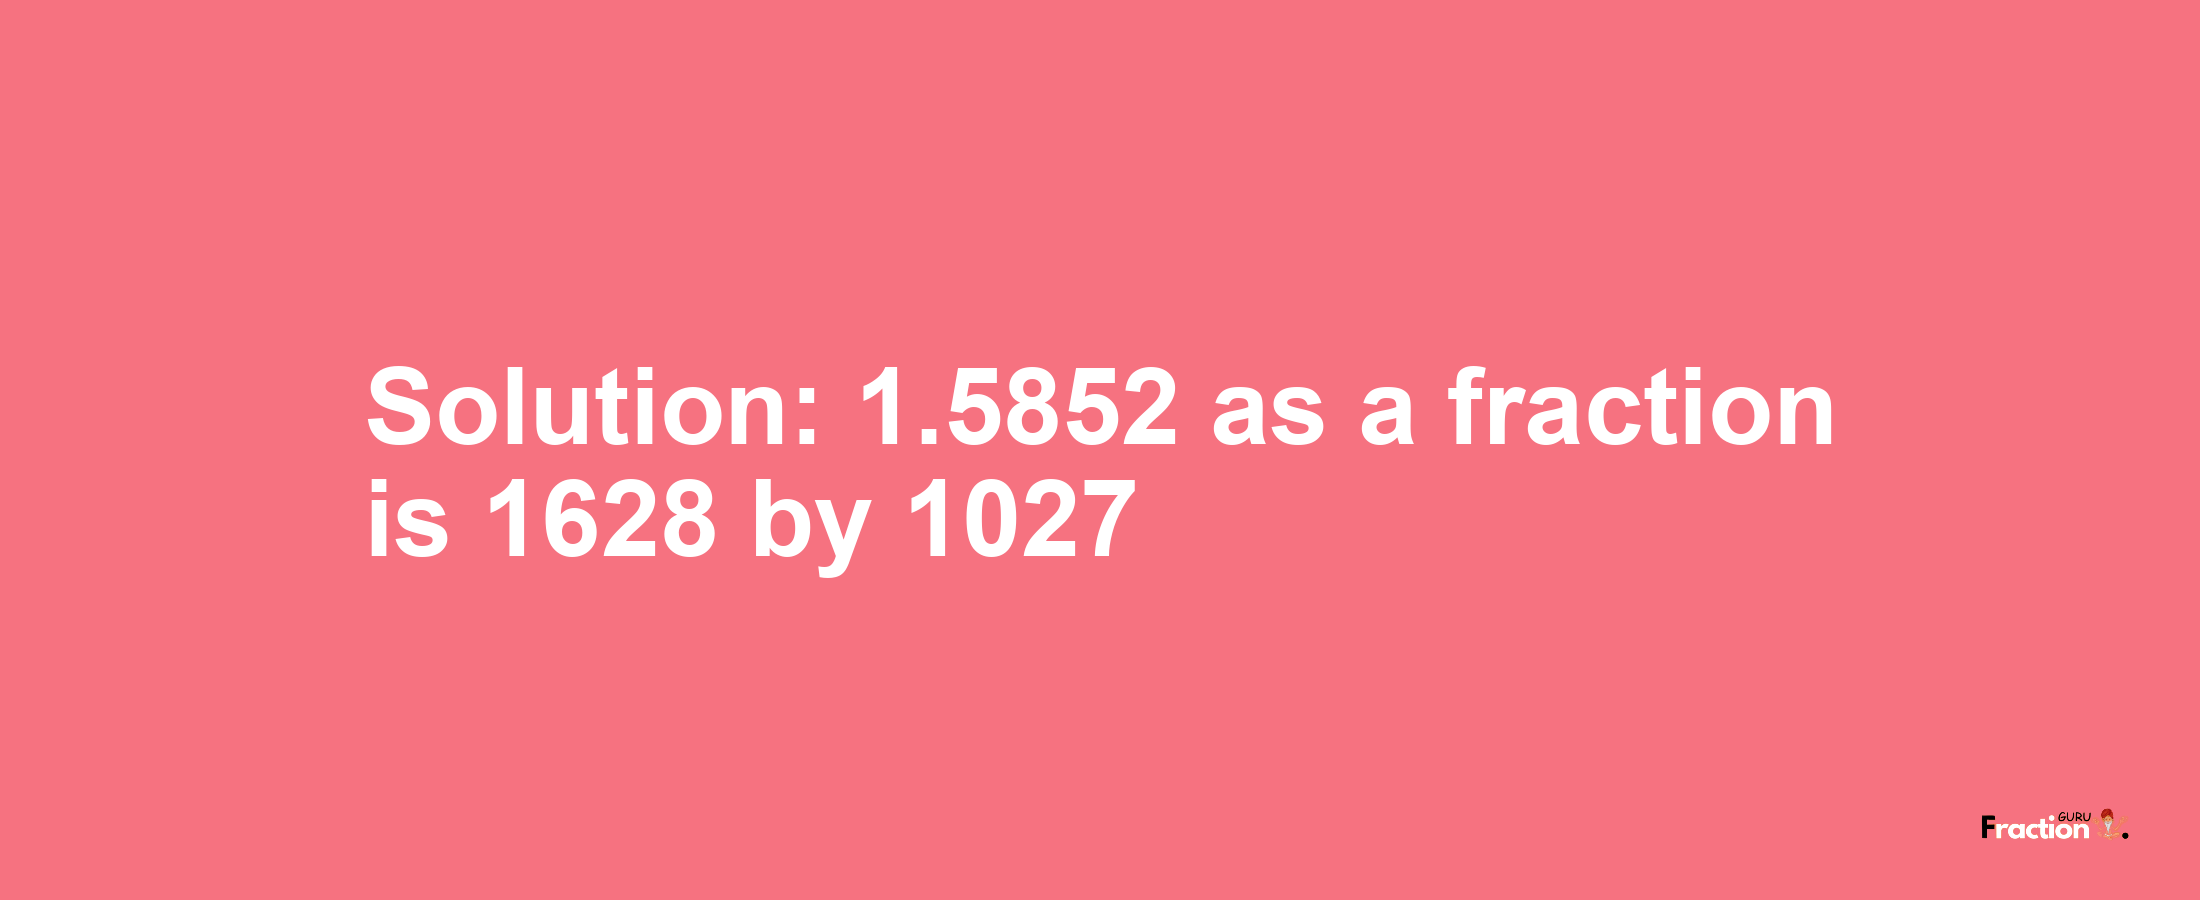 Solution:1.5852 as a fraction is 1628/1027